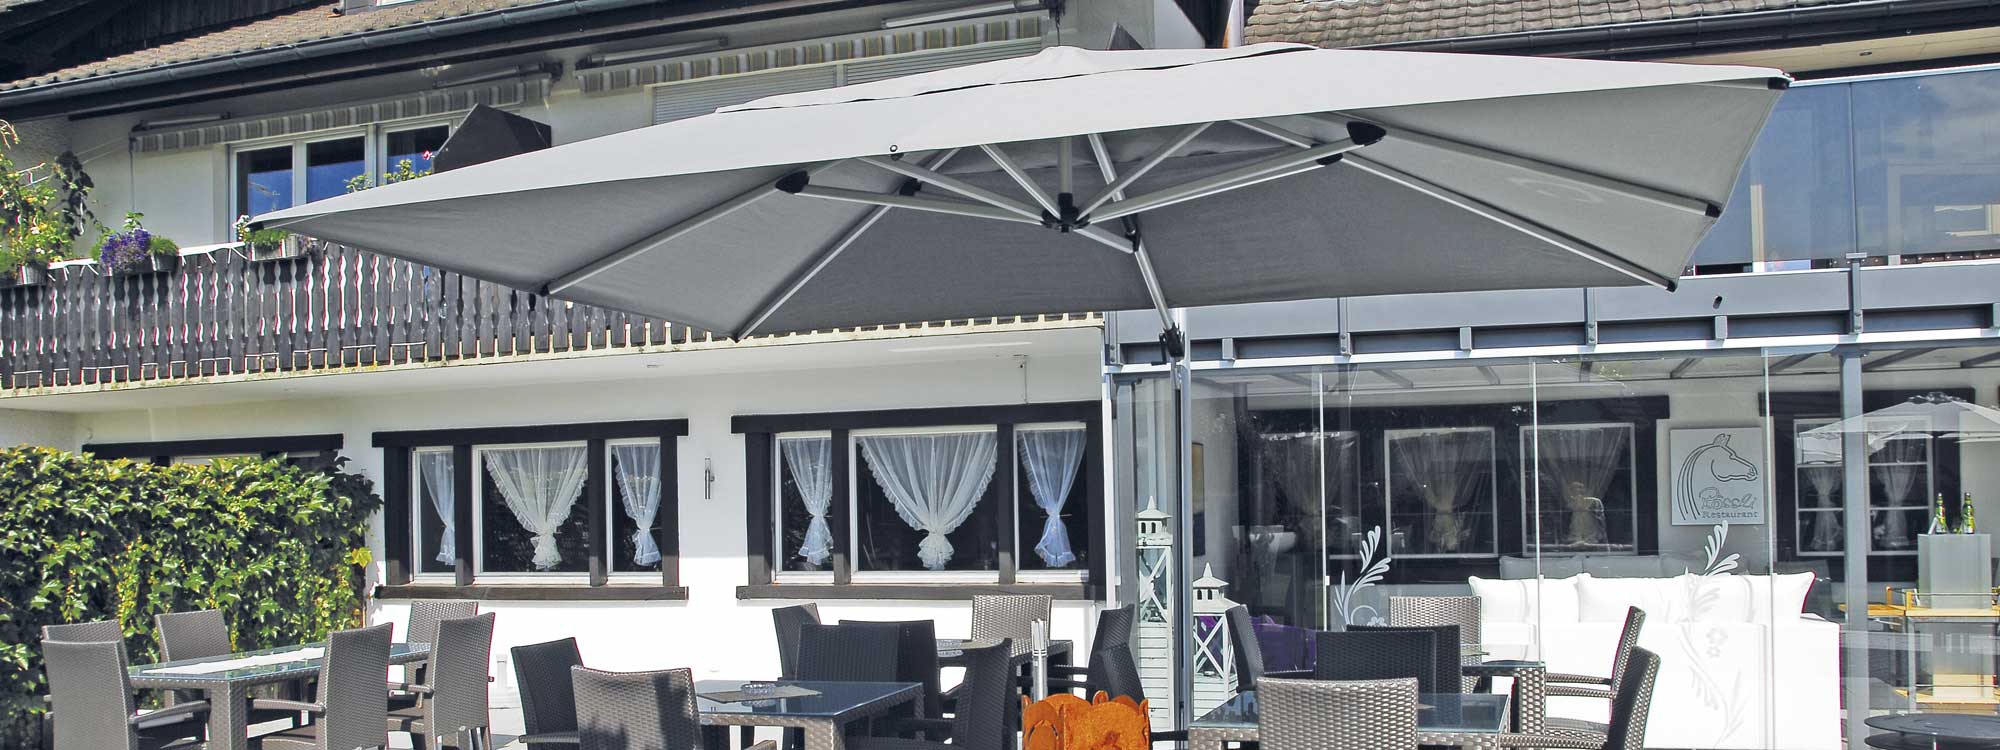 Polaris large cantilever parasol is an adjustable garden sunshade in high quality parasol materials by Shademaker hospitality parasol company